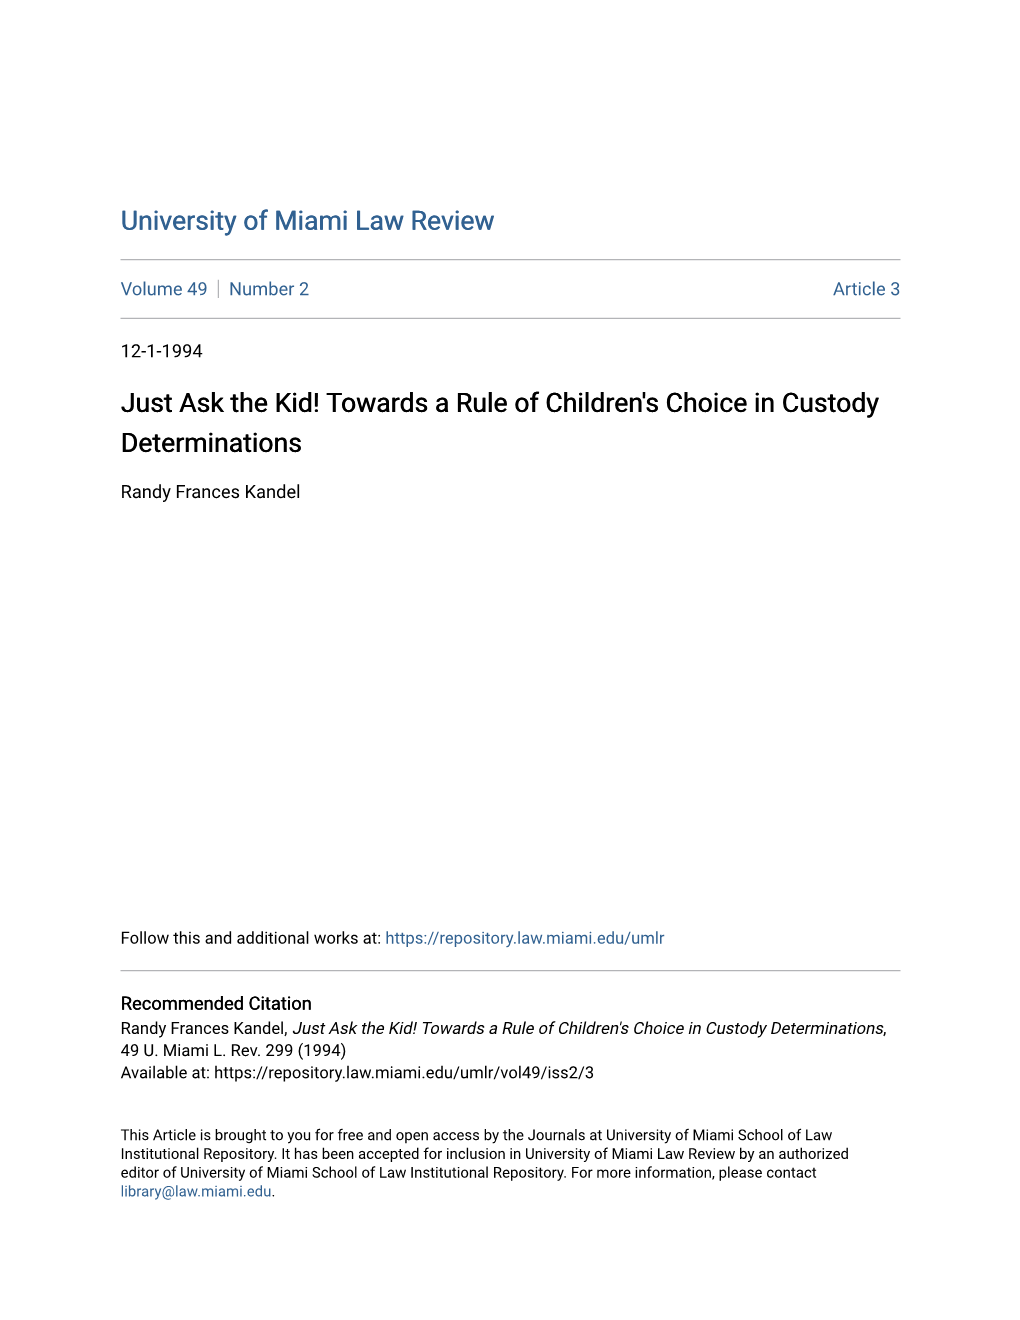 Towards a Rule of Children's Choice in Custody Determinations